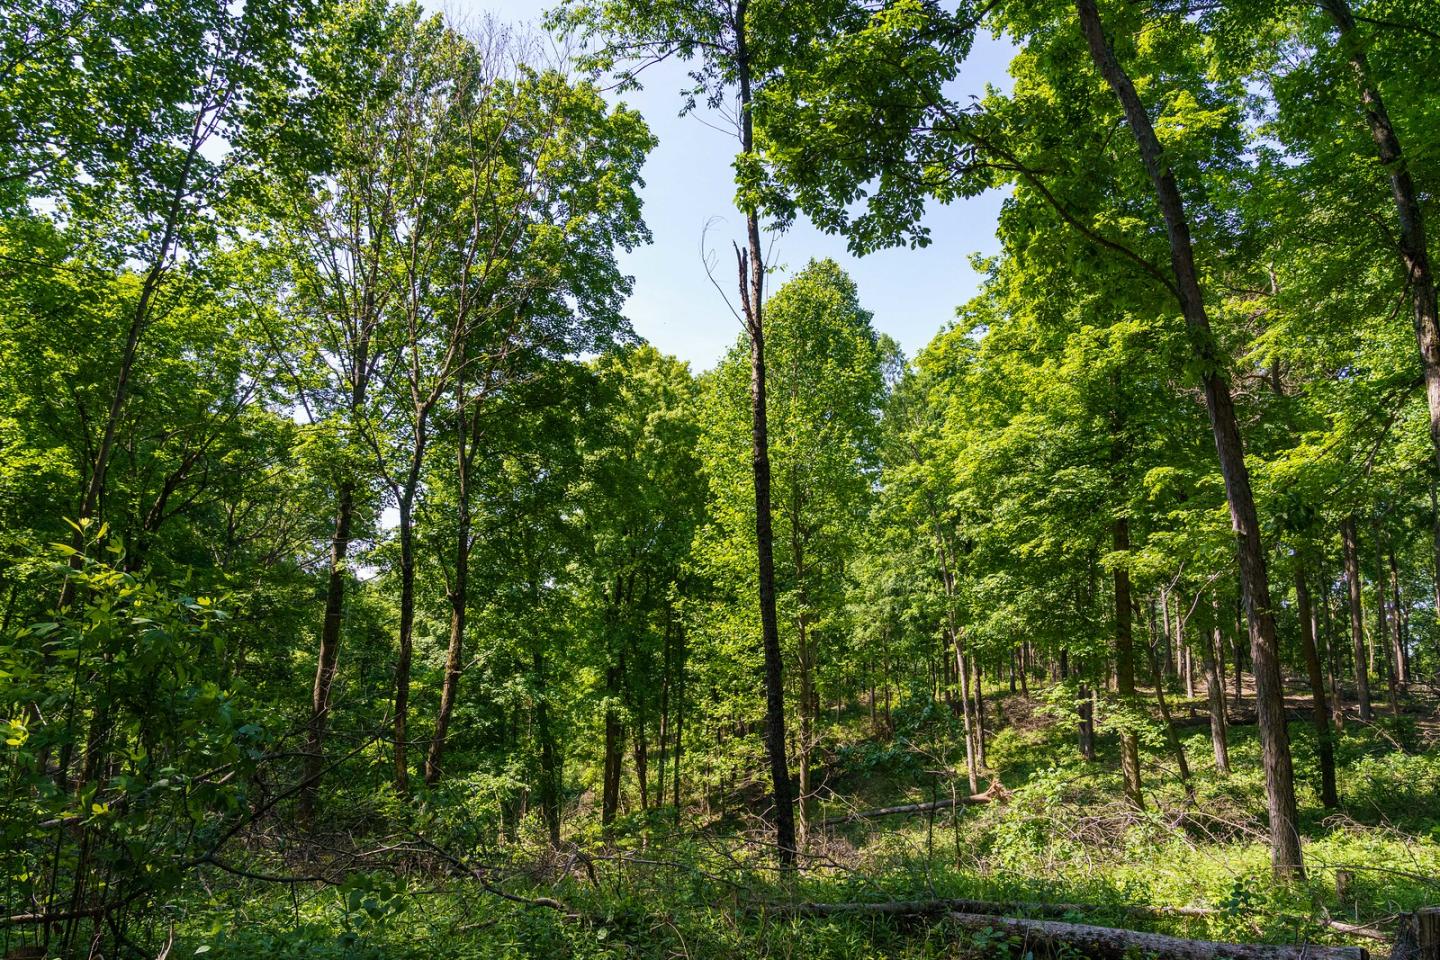 David Ray purchased 310 acres of forestland in Jackson County, IN in 1995 to use for recreational purposes including hunting, hiking and foraging. Ray enrolled his land, pictured on May 24, 2022, in NRCS’ Environmental Quality Incentives Program in 2017 for forest stand improvement and brush management. After the conclusion of his EQIP contract, he enrolled the acres in NRCS’ Conservation Stewardship Program to complete herbaceous weed treatment, help facilitate oak forest regeneration, and plant conser